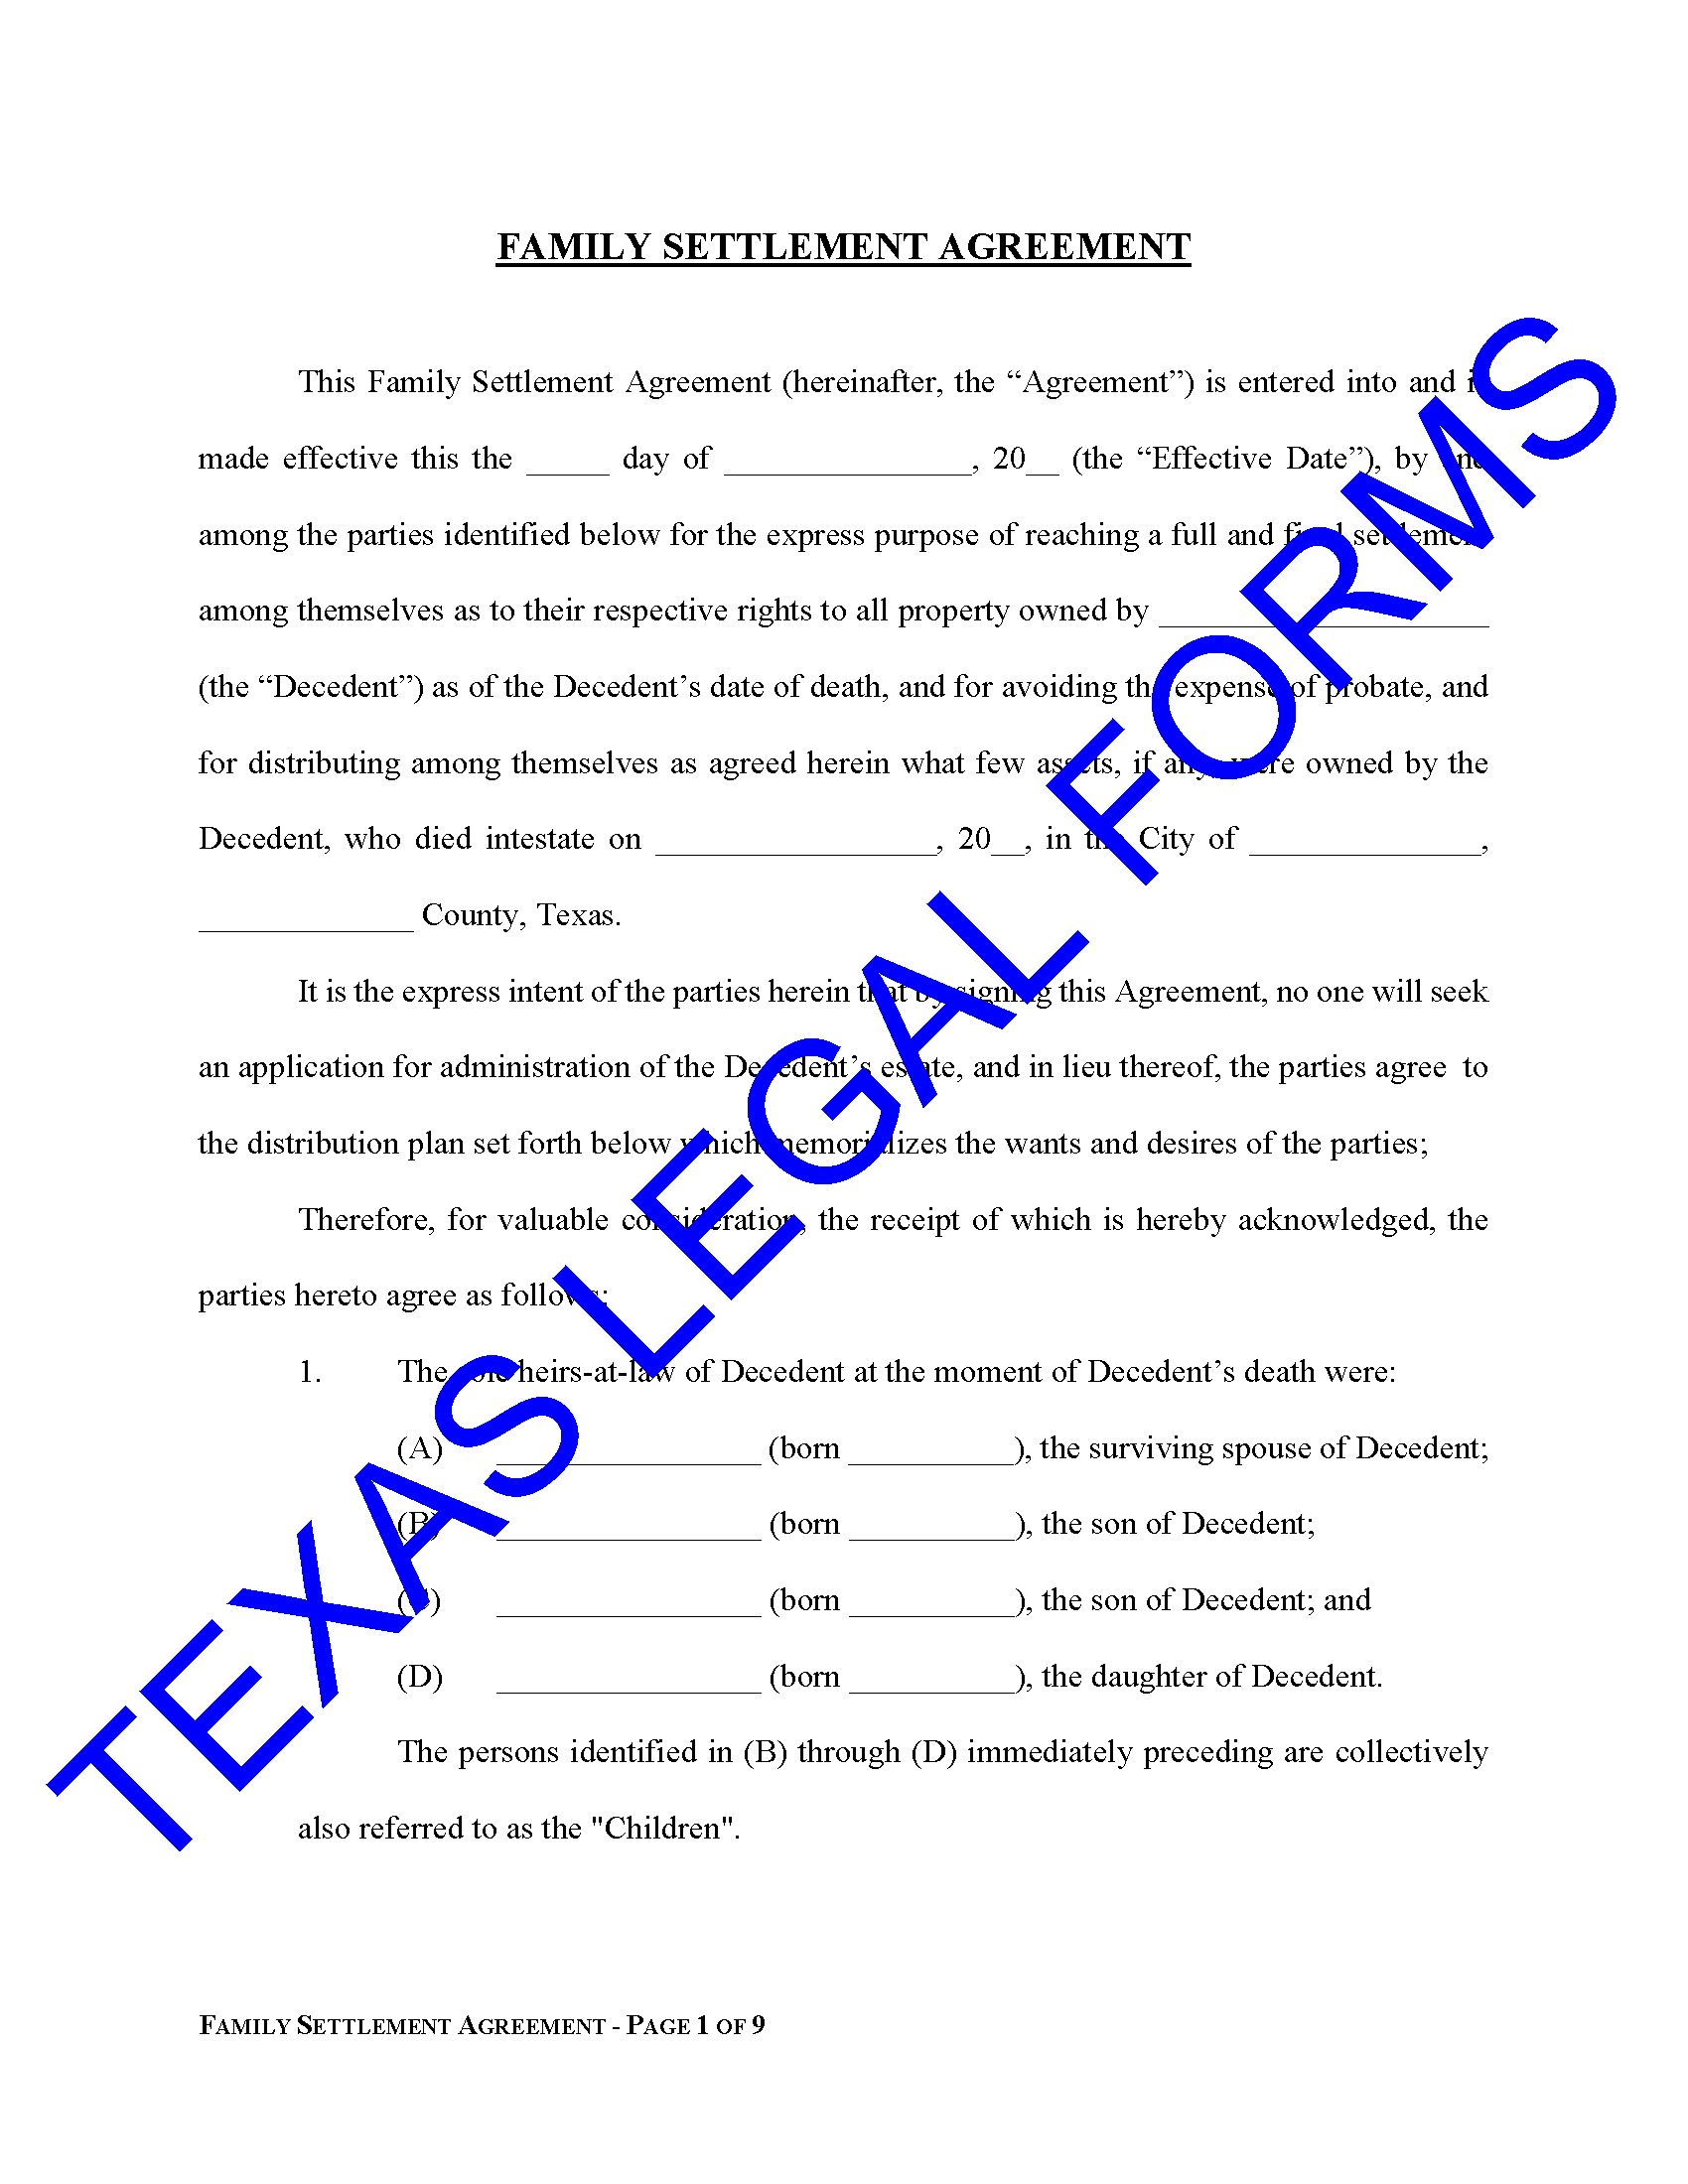 Family Settlement Agreement Texas Legal Forms by David Goodhart, PLLC